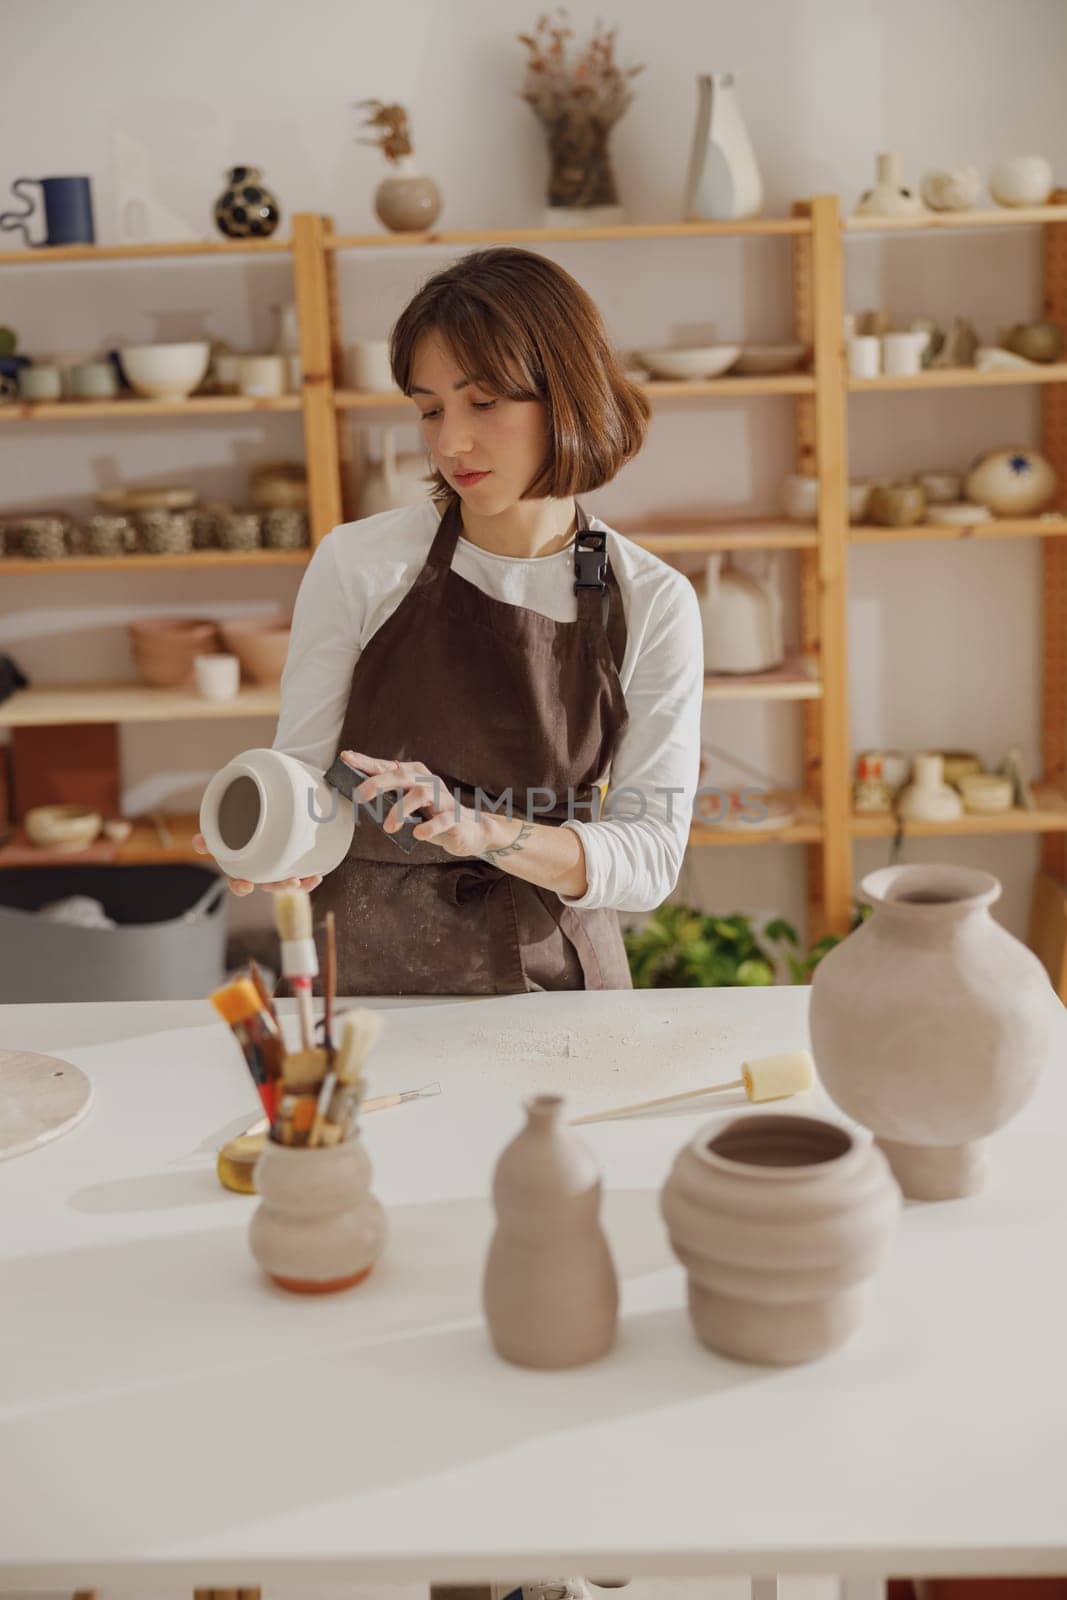 Young female potter holding unfired clay vase while standing in pottery studio. High quality photo